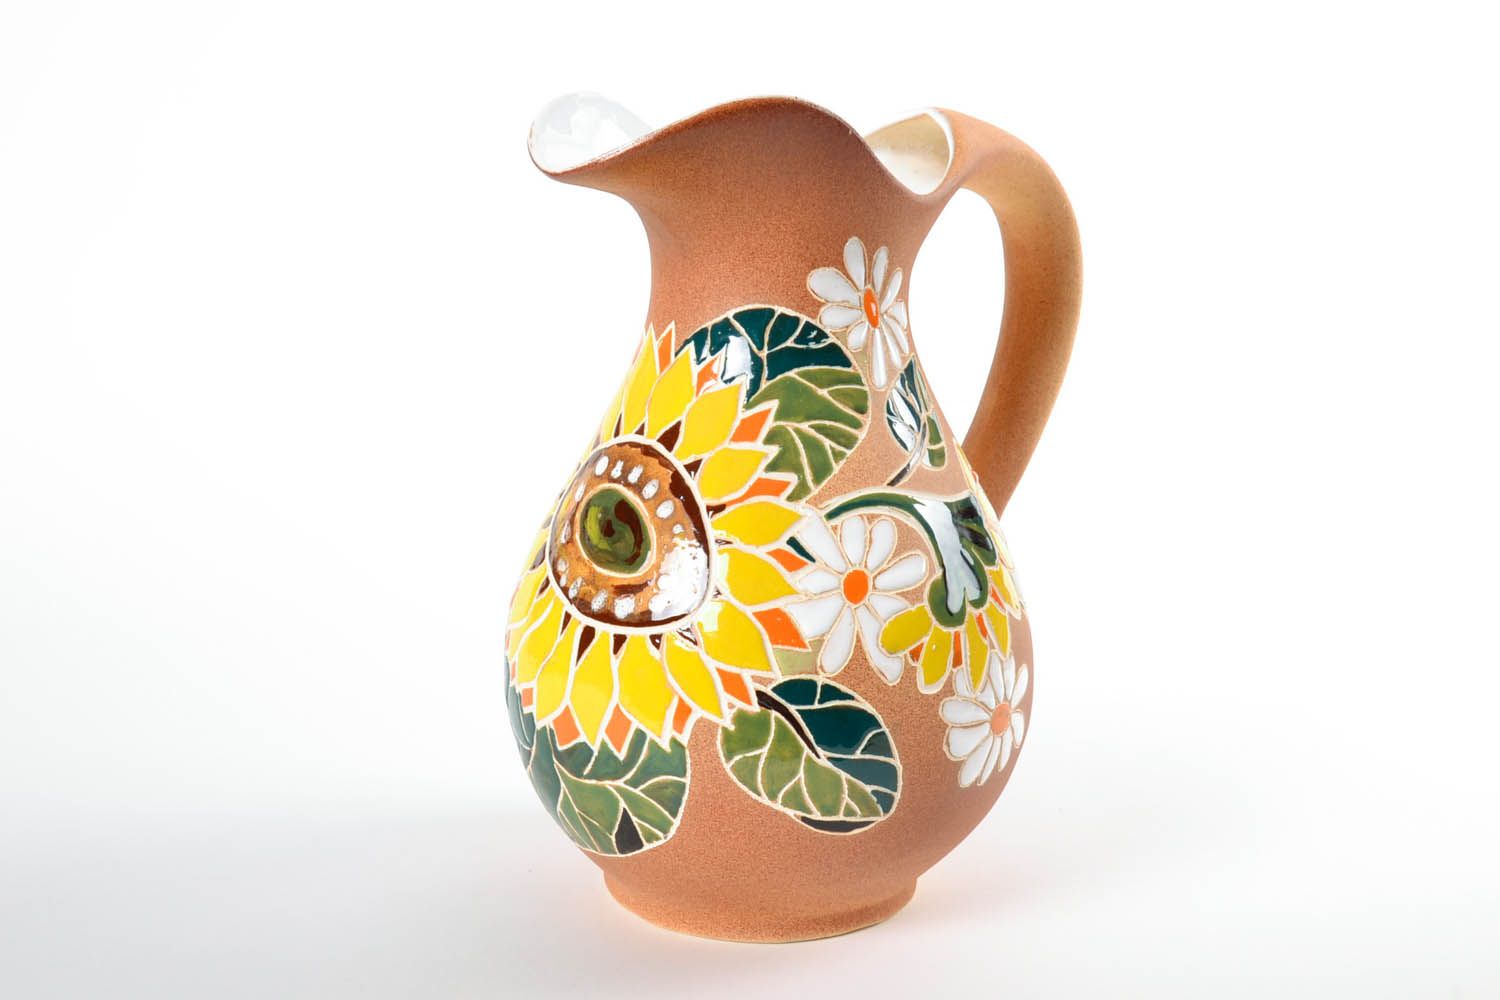 100 oz ceramic water pitcher with handle and floral design in beige, yellow, green colors 4 lb photo 3